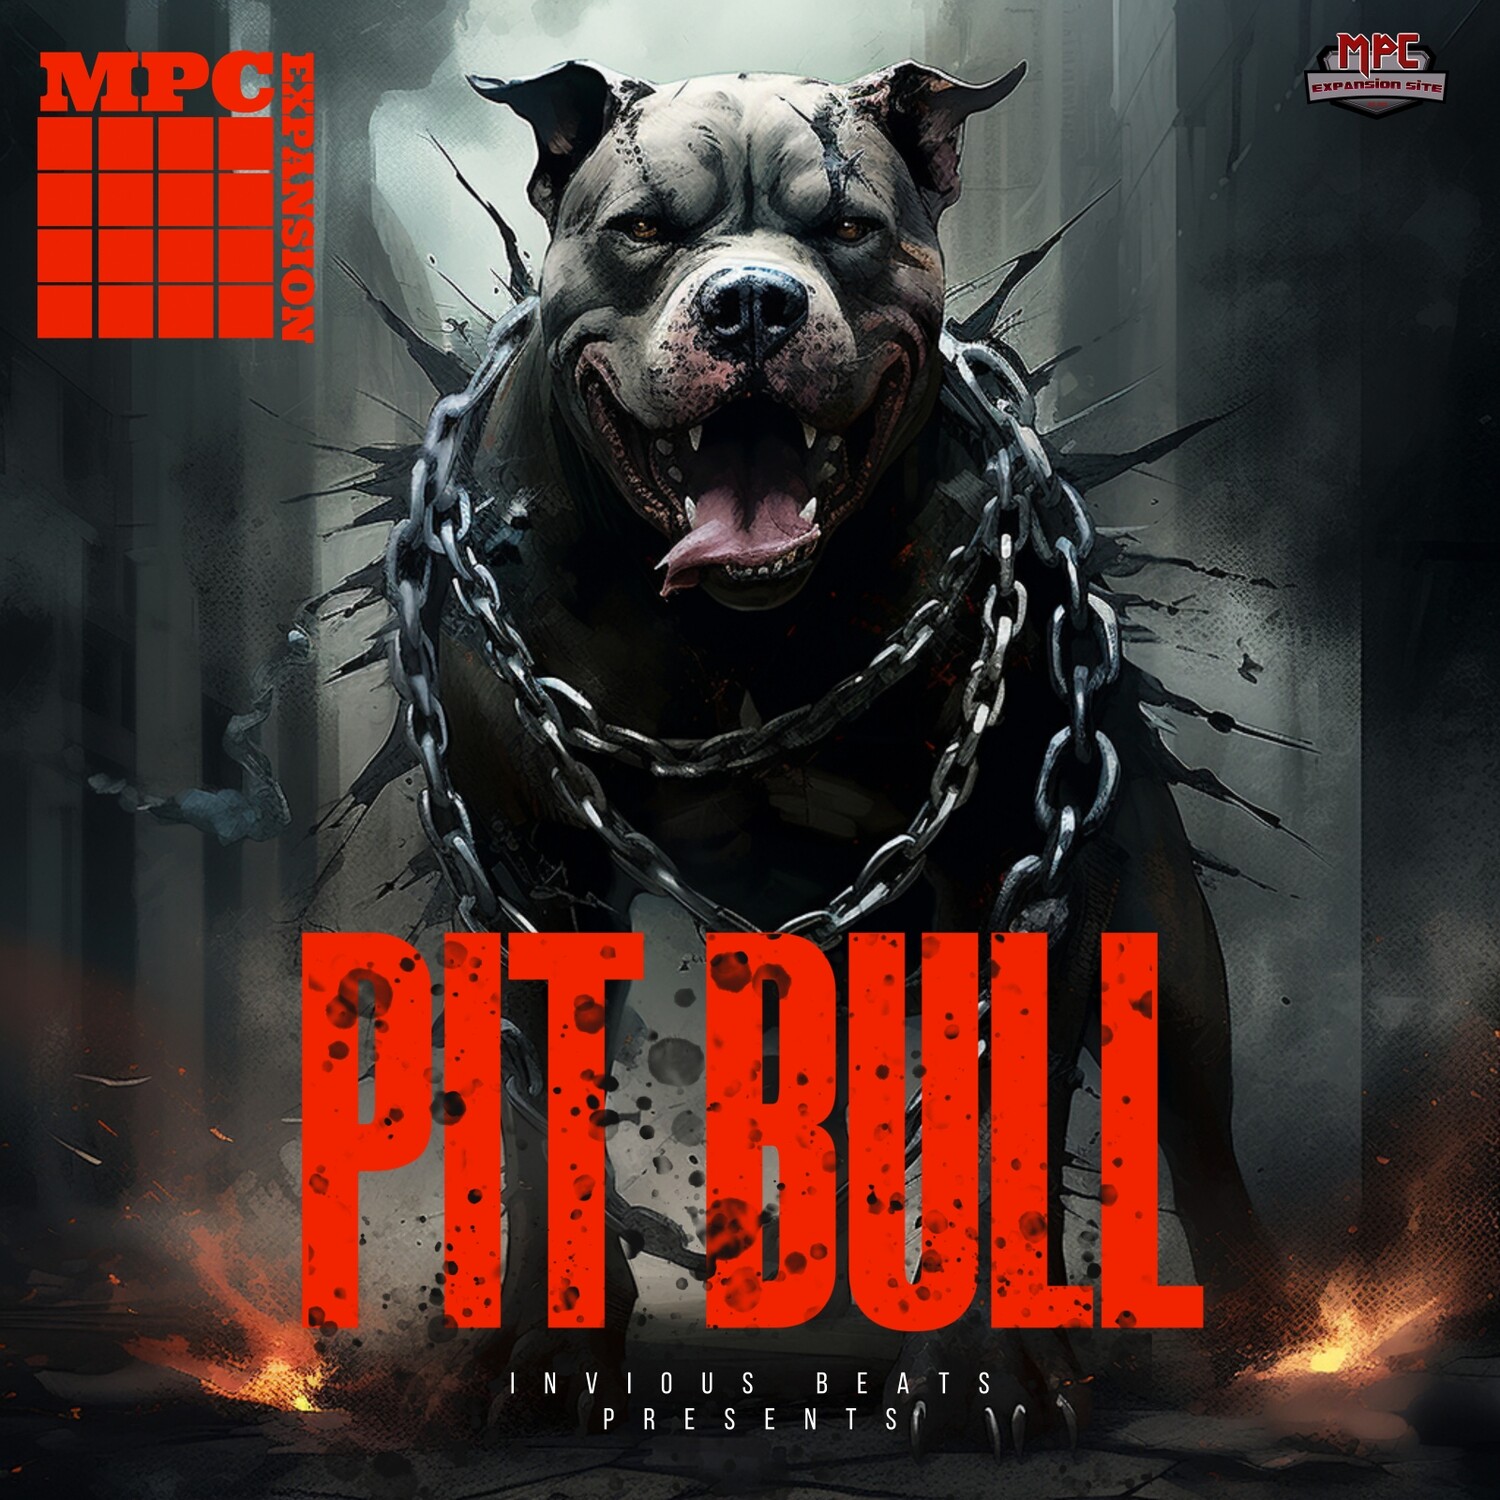 MPC EXPANSION 'PIT BULL' by INVIOUS